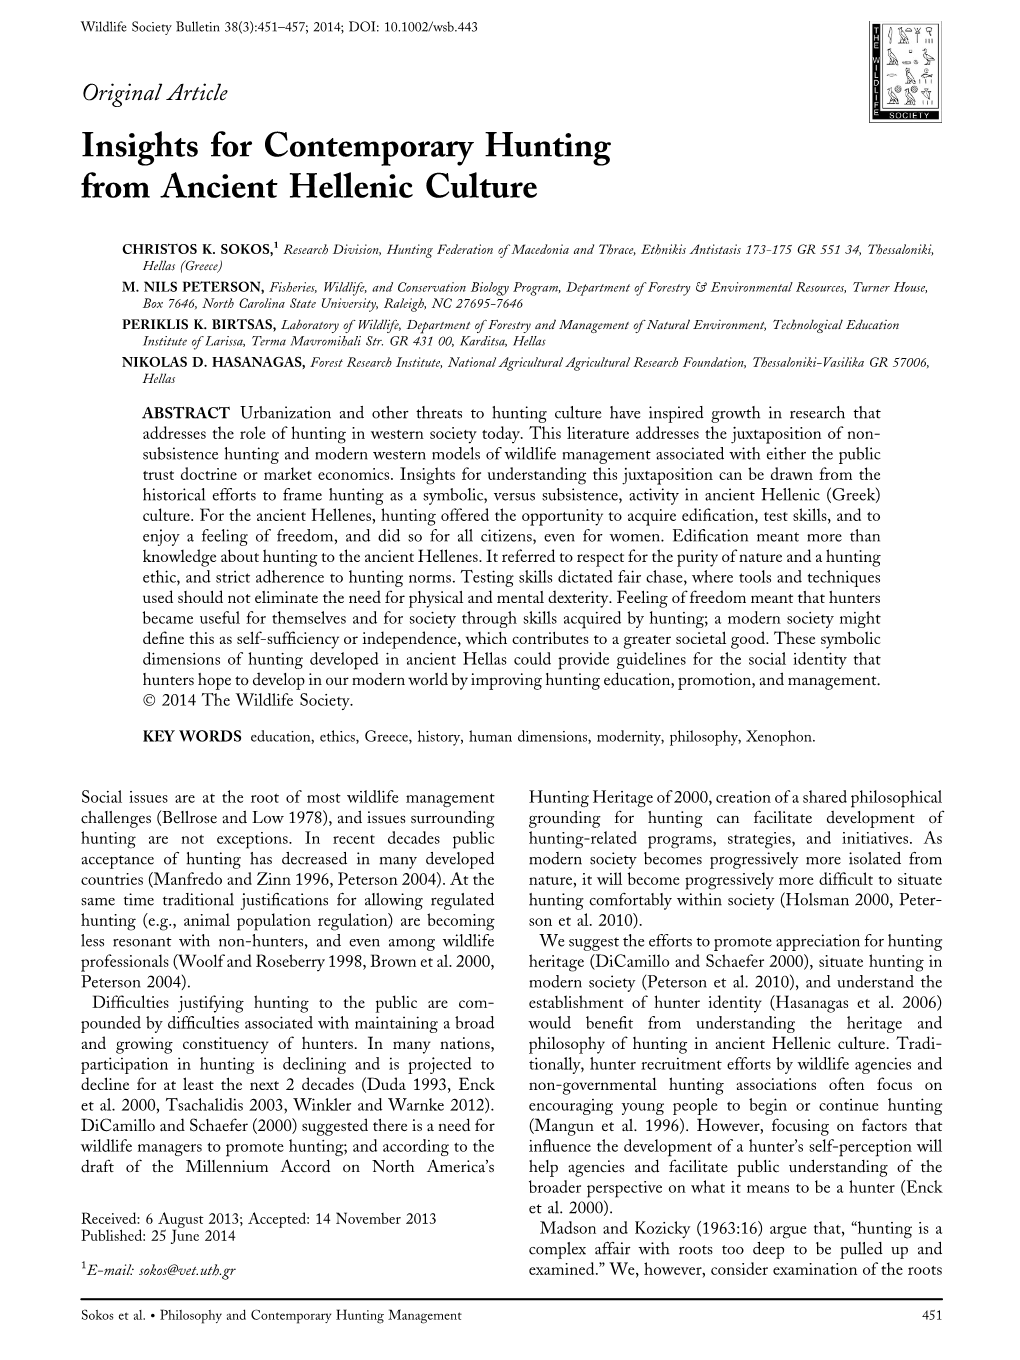 Insights for Contemporary Hunting from Ancient Hellenic Culture